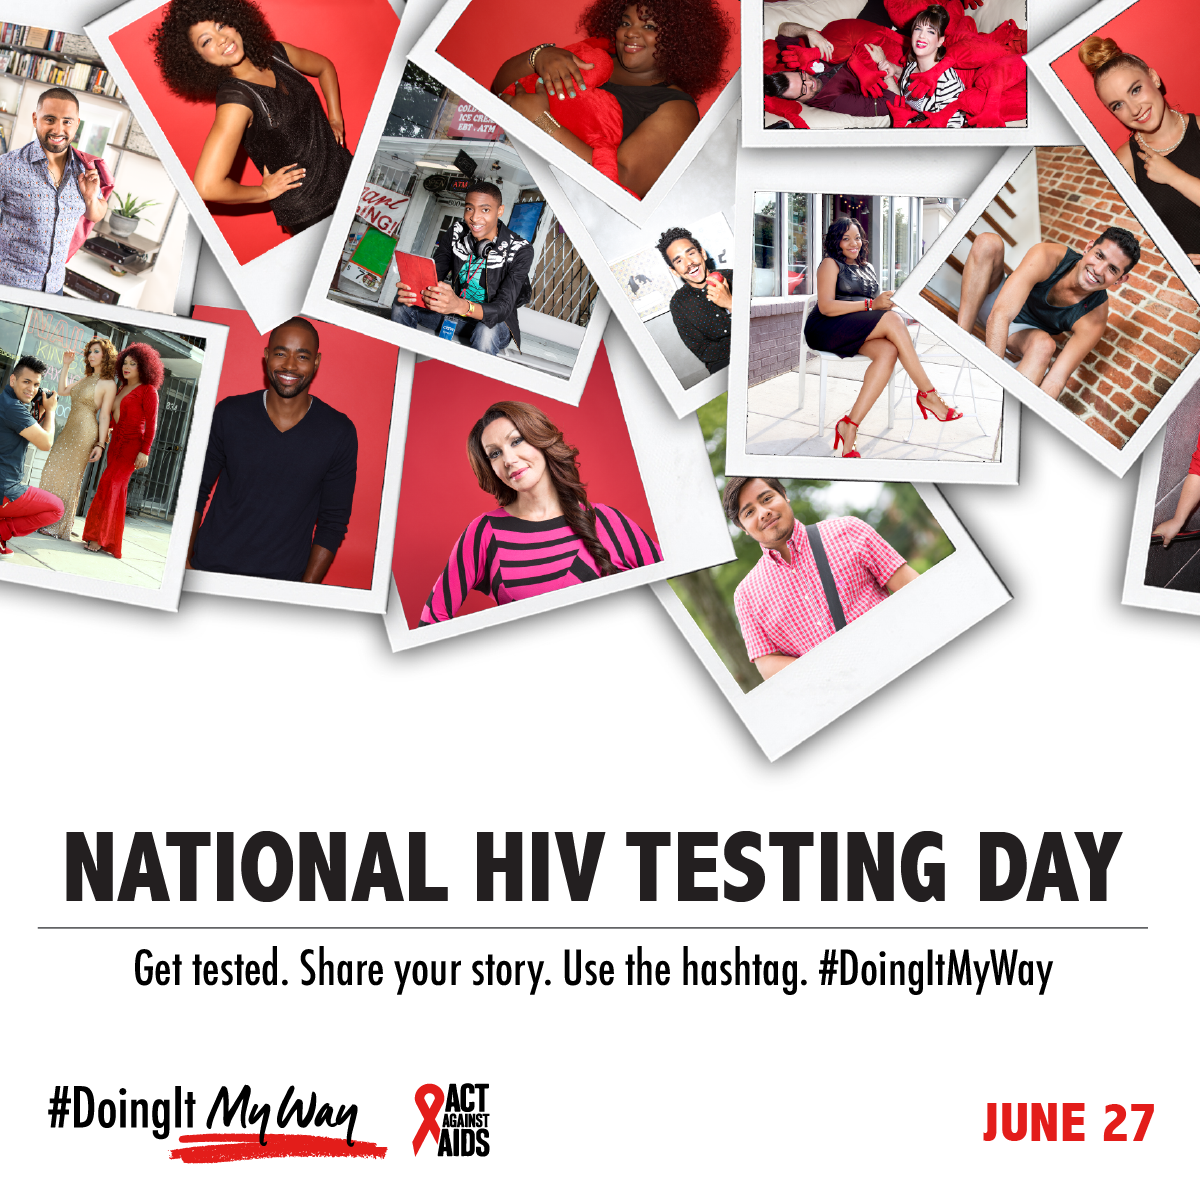 National HIV testing day events planned